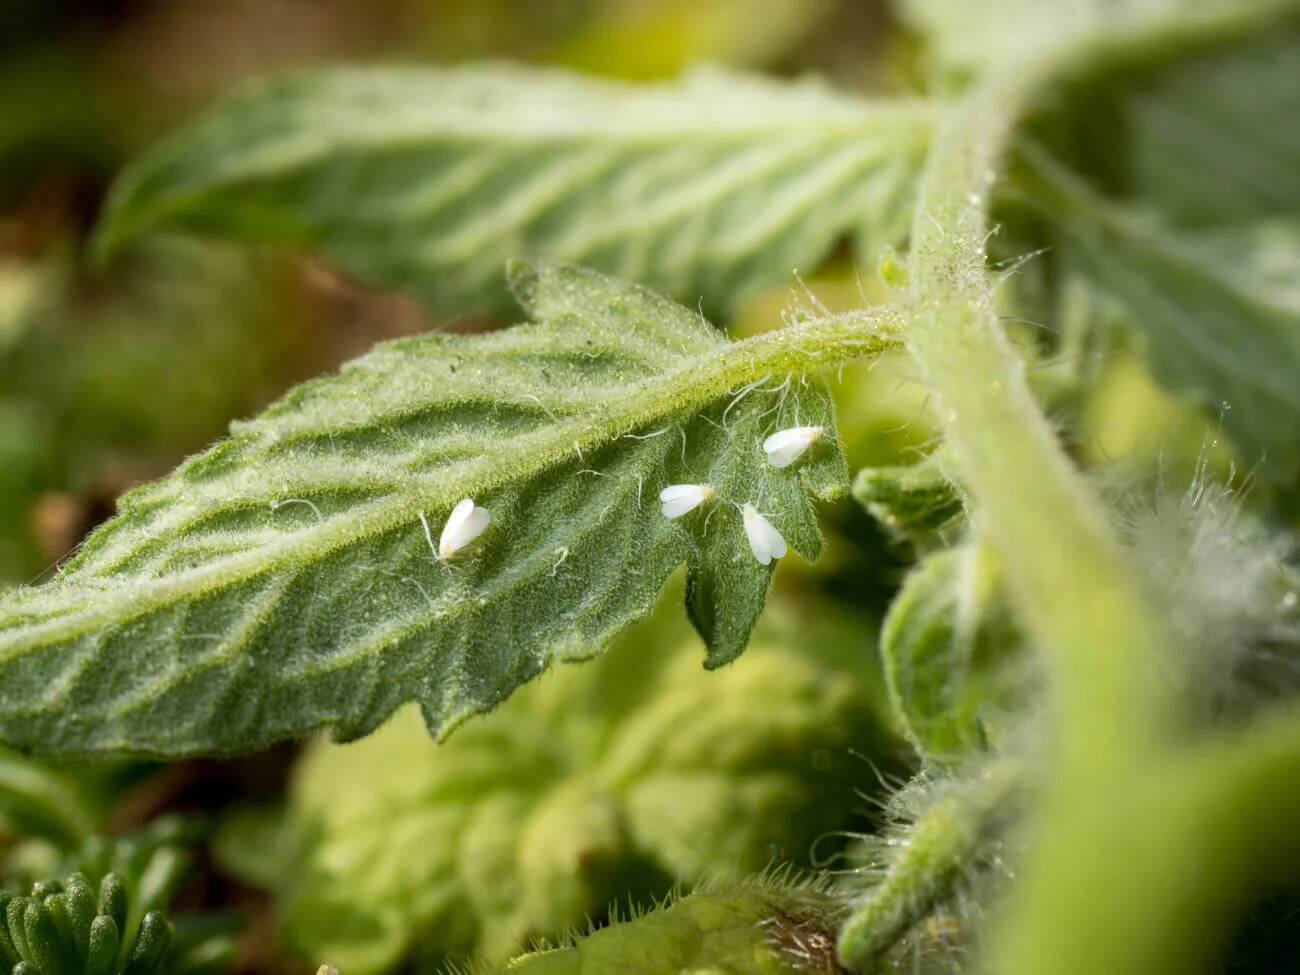 Treatments for Whitefly Infestations on Cannabis Plants